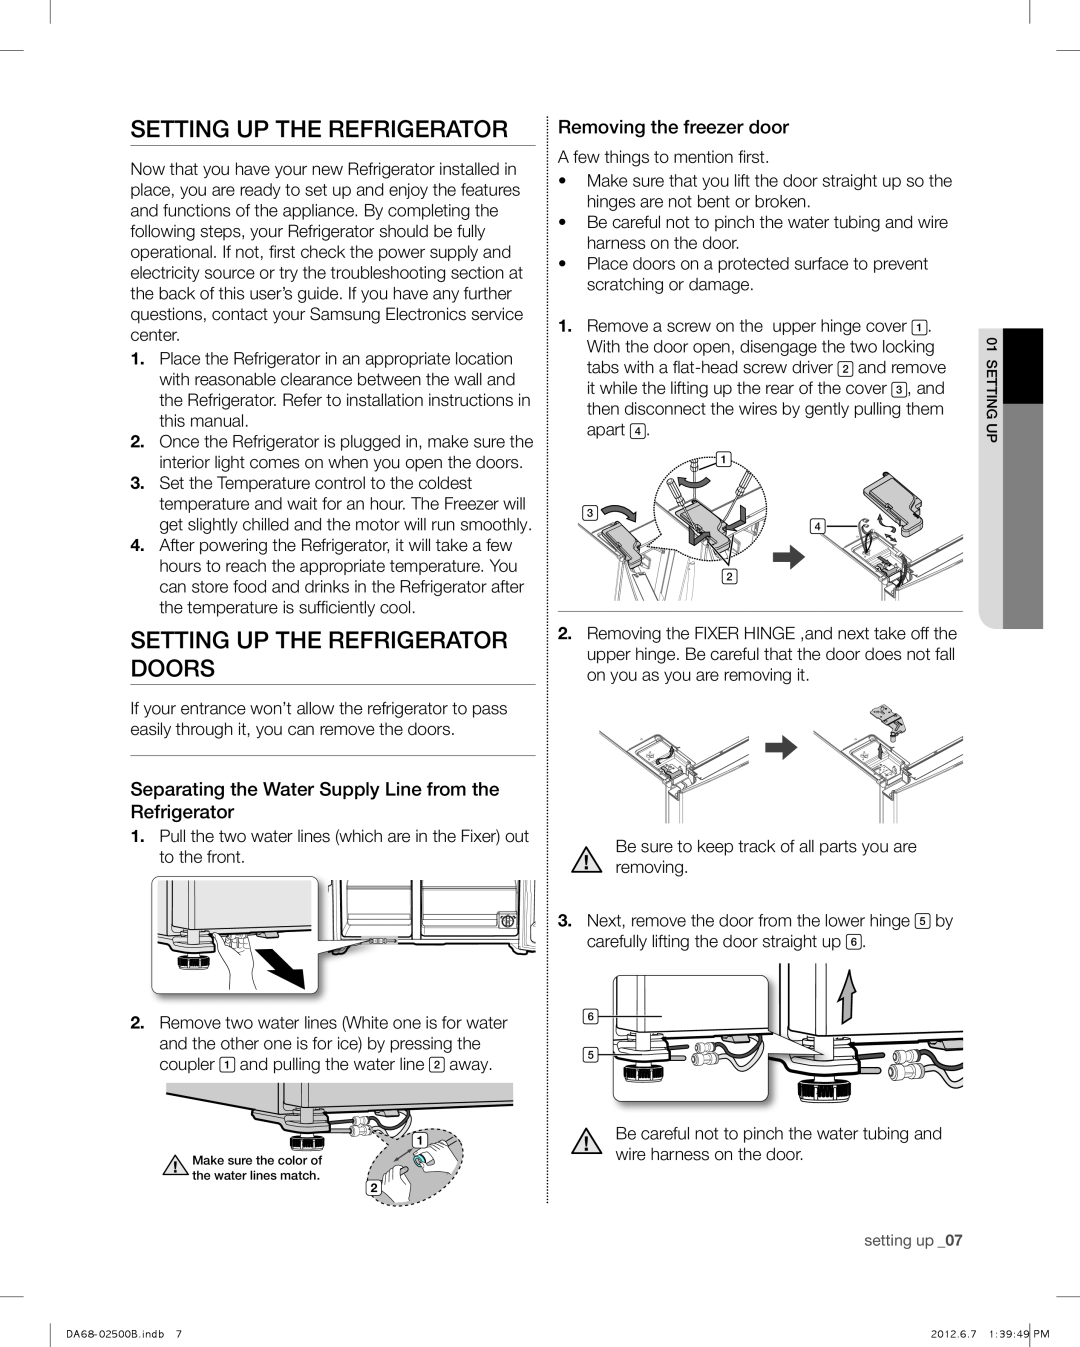 Samsung RSG309AARS user manual setting uP tHe ReFRigeRAtoR, SETTING UP the refrigerator doors, Removing the freezer door 